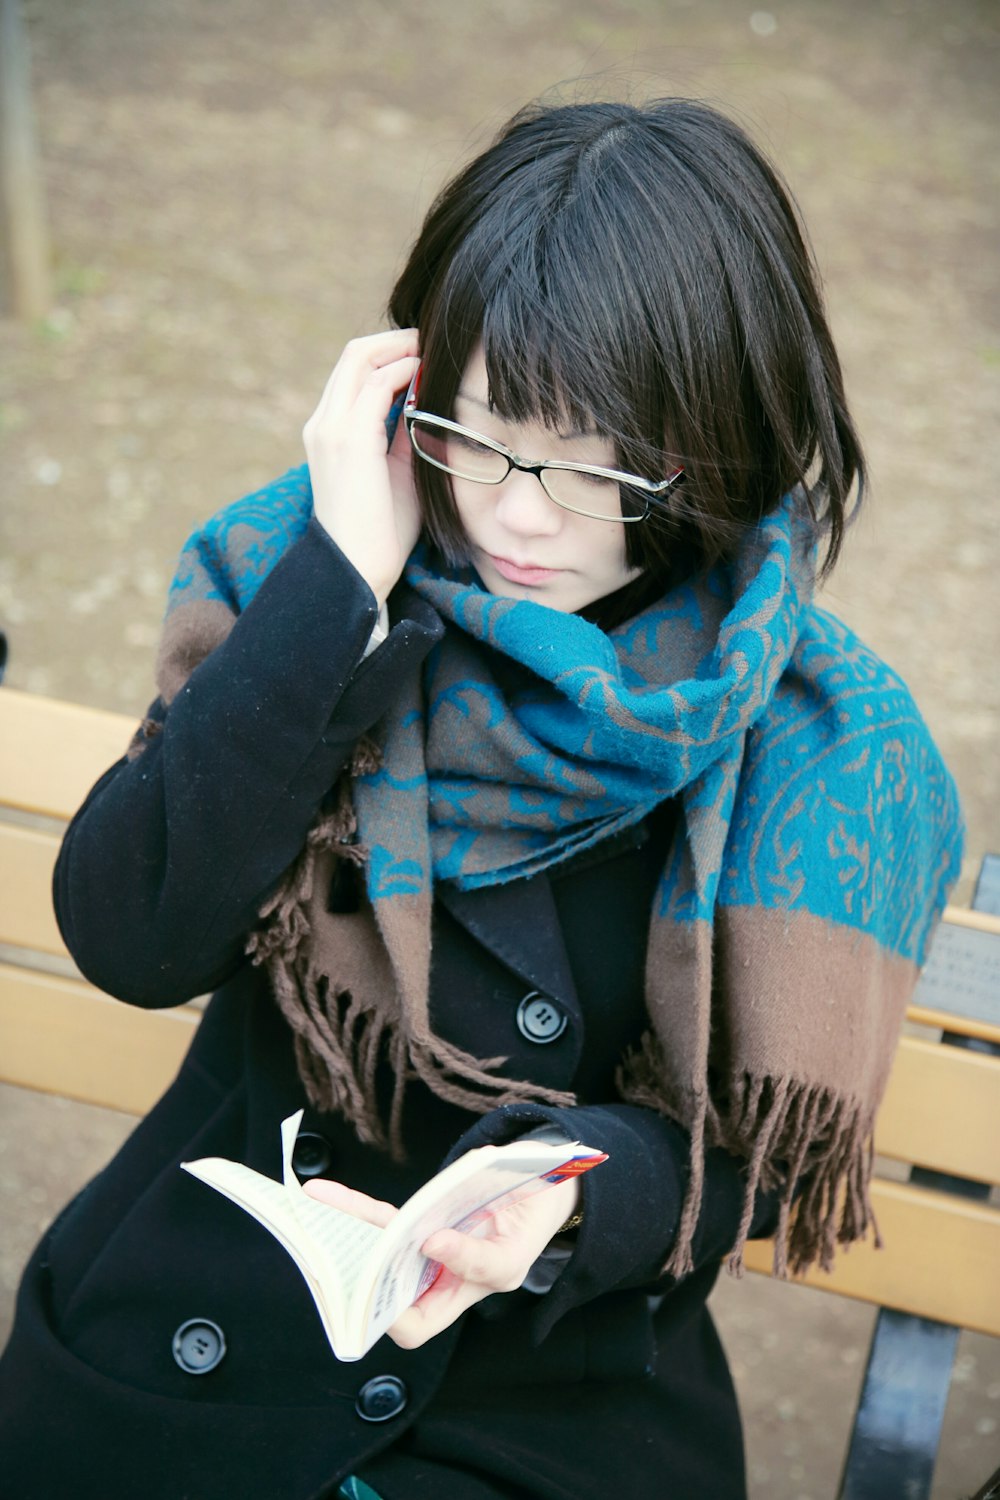 woman sitting on bench reading book